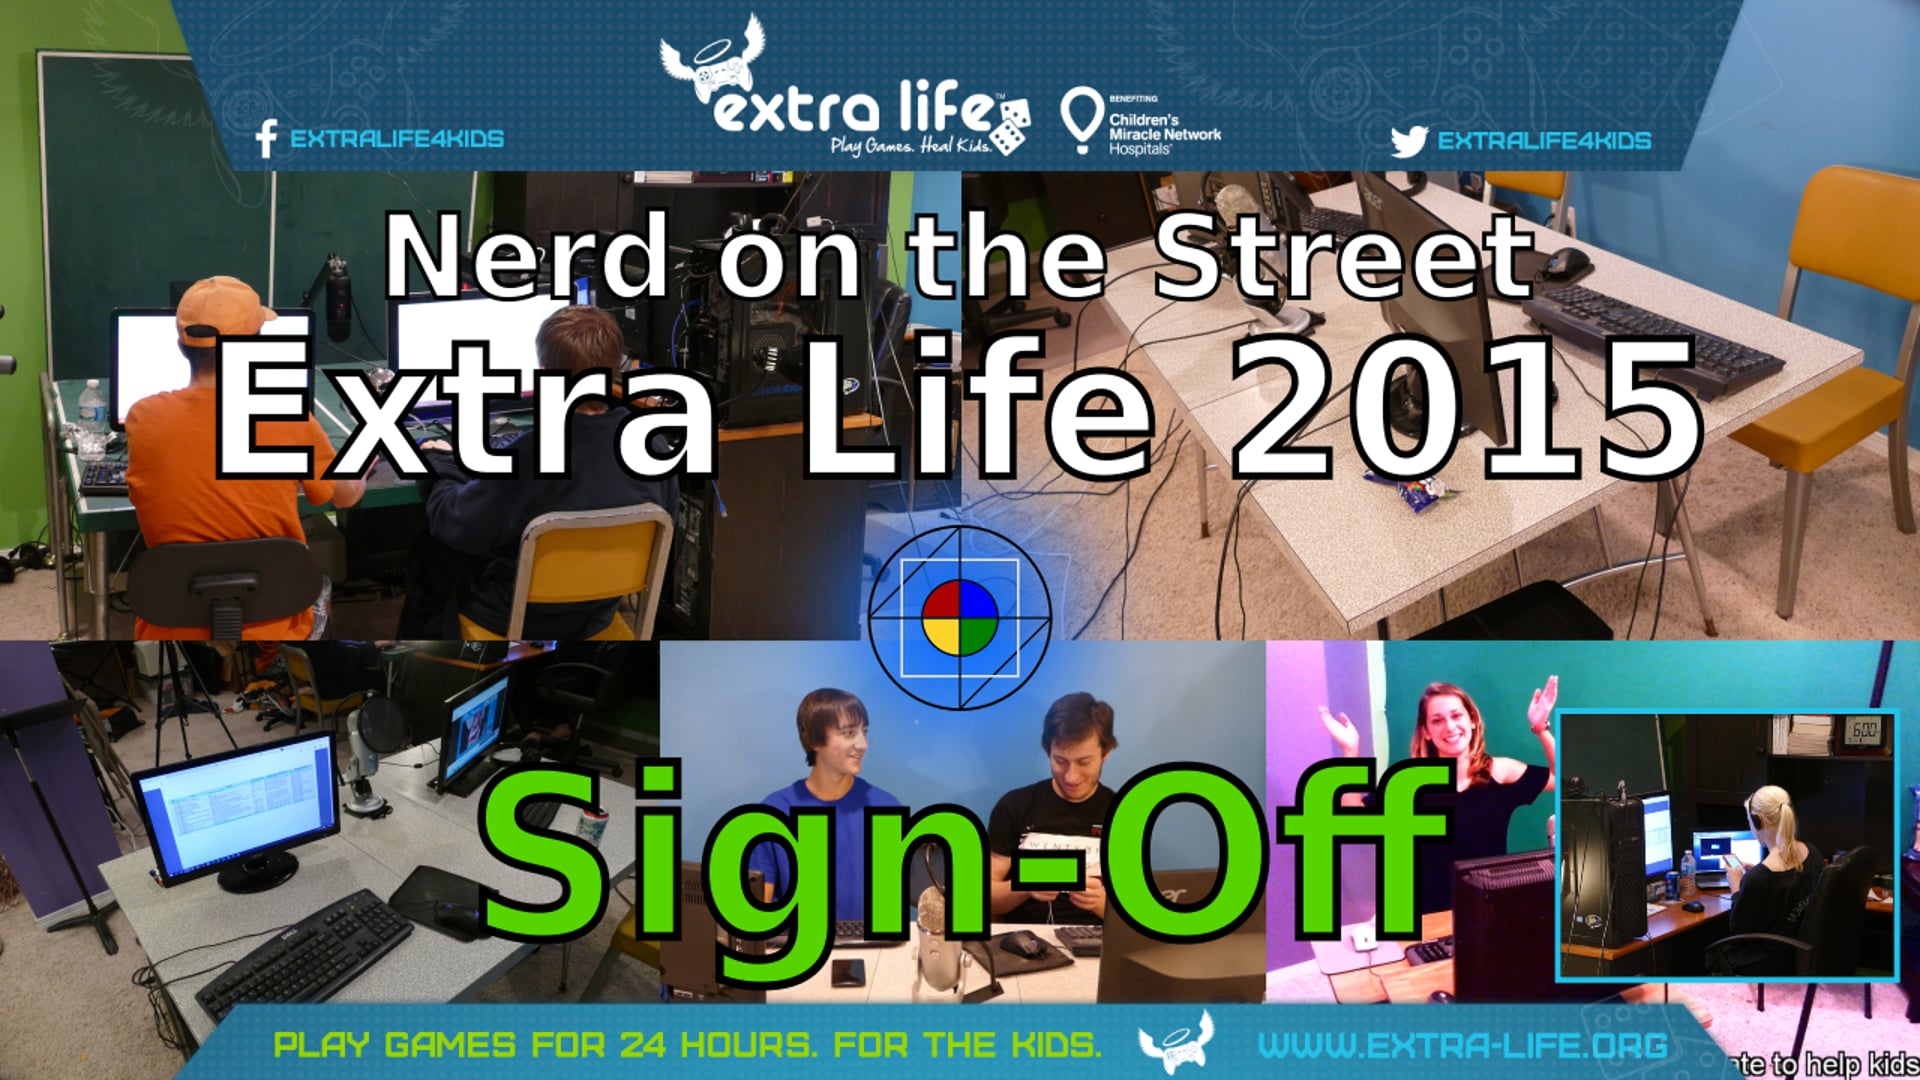 Extra Life 2015 Sign-off